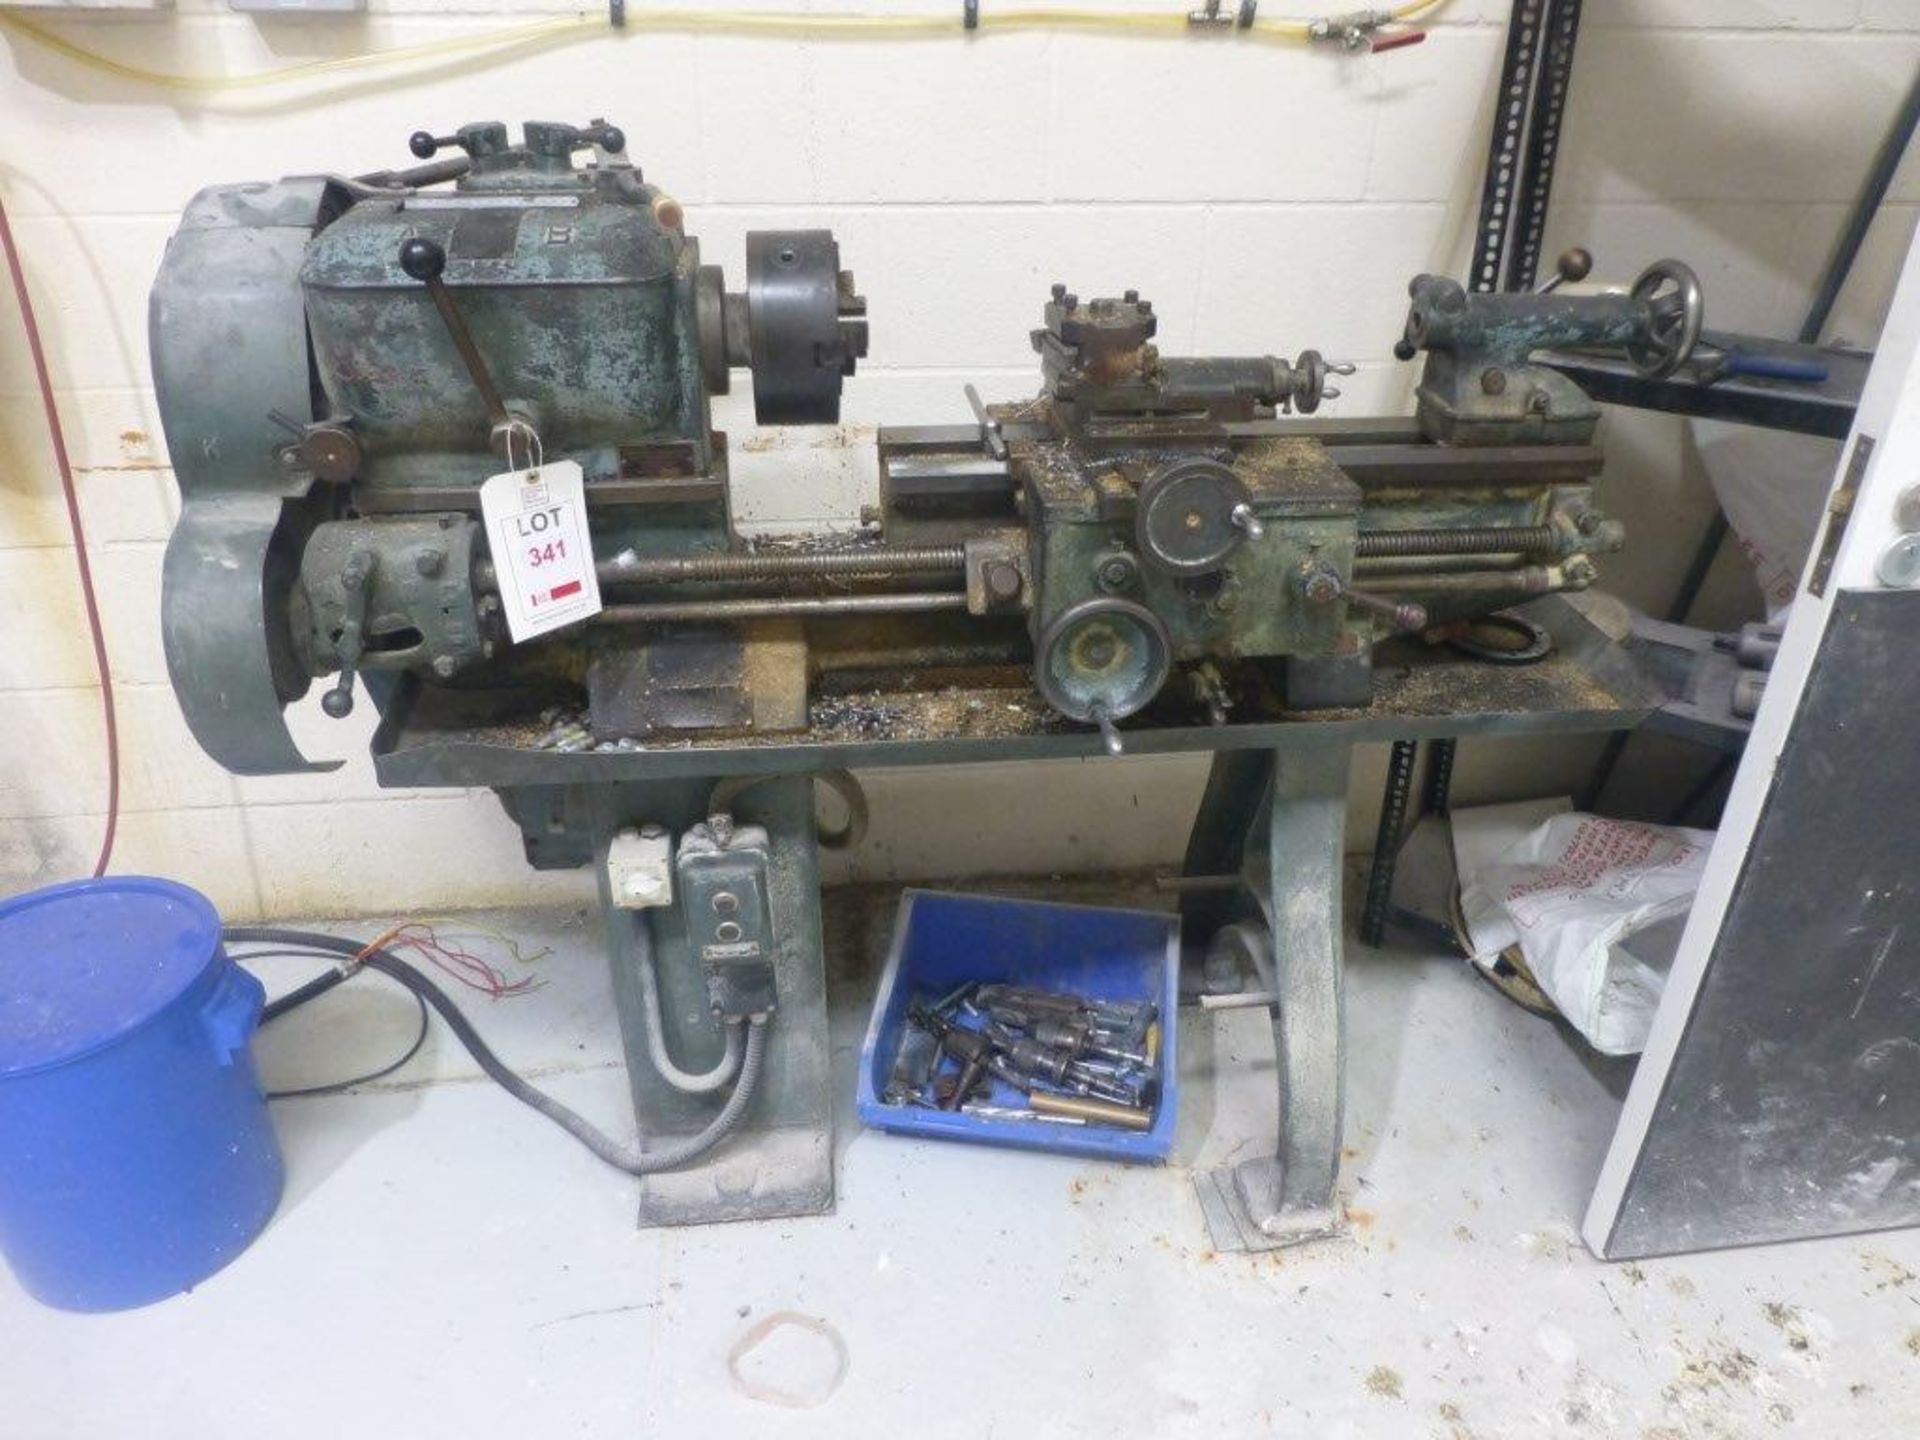 AB centre metalworking lathe with 5 " overbed swing and 24" between centres